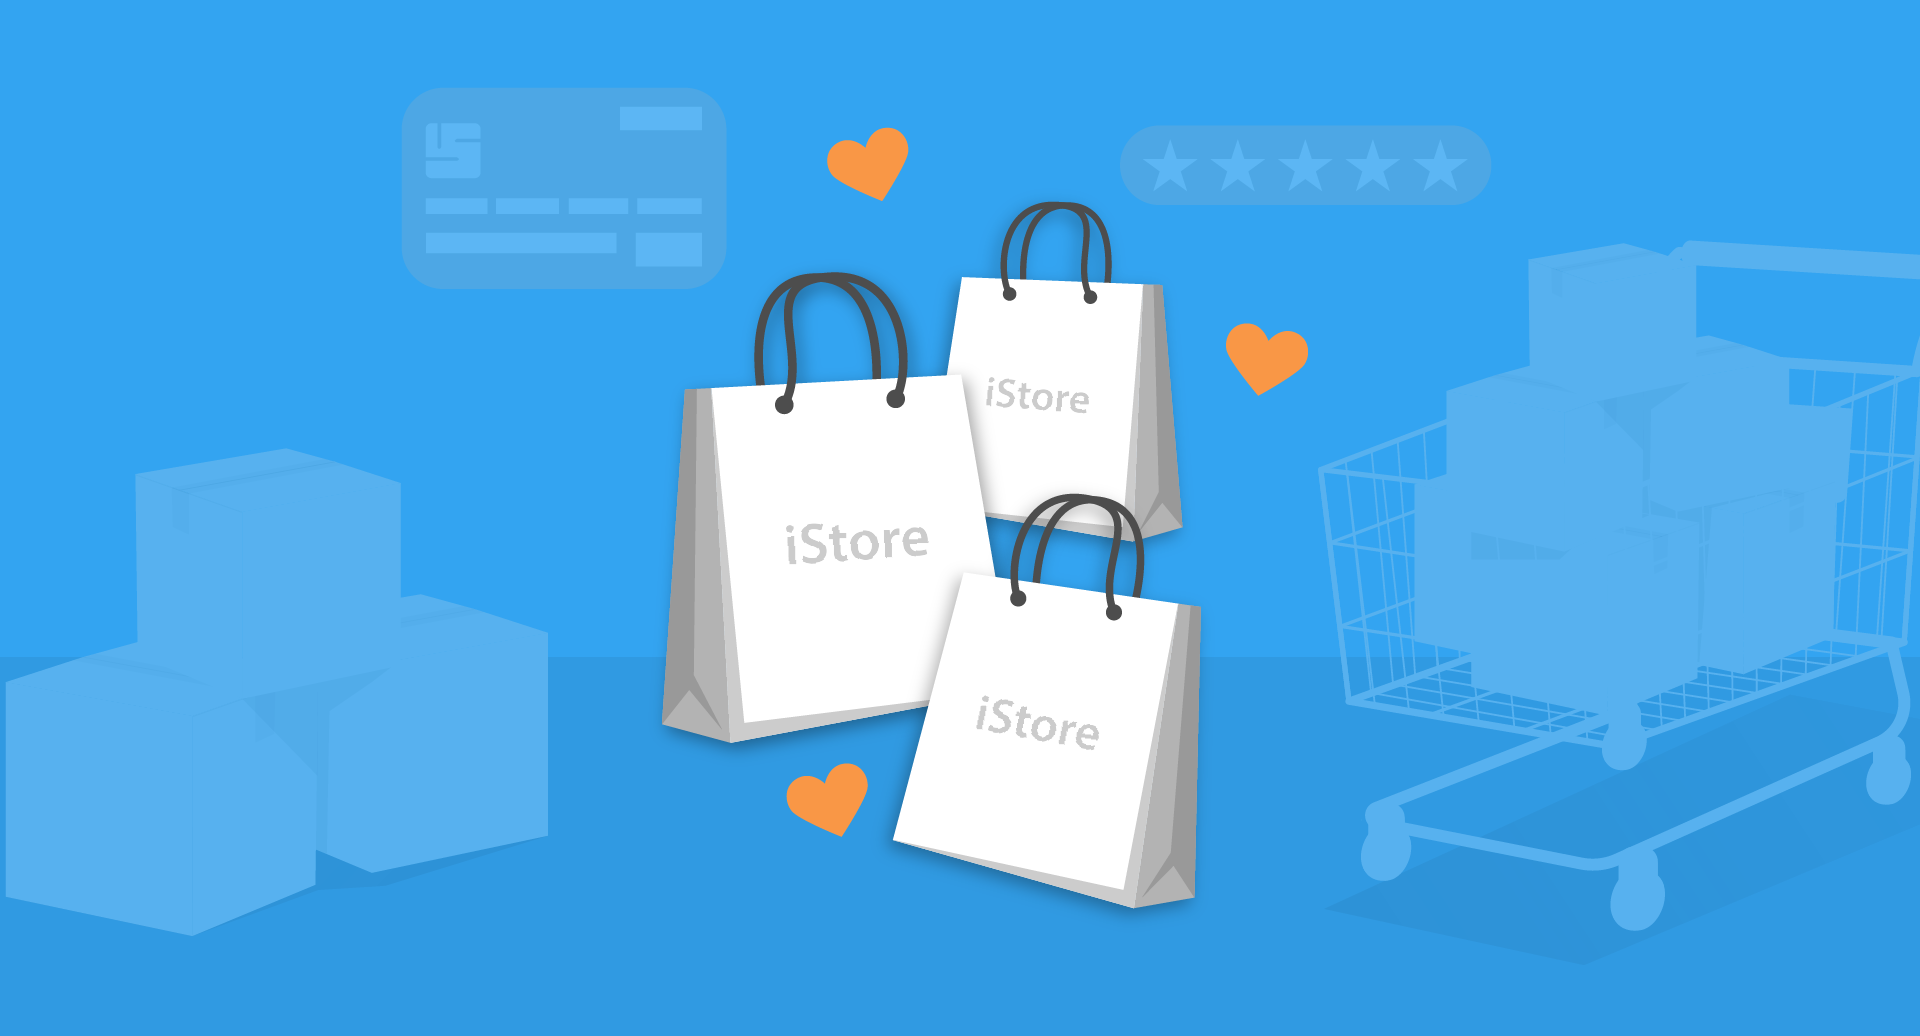 Shopping made easy with iStore